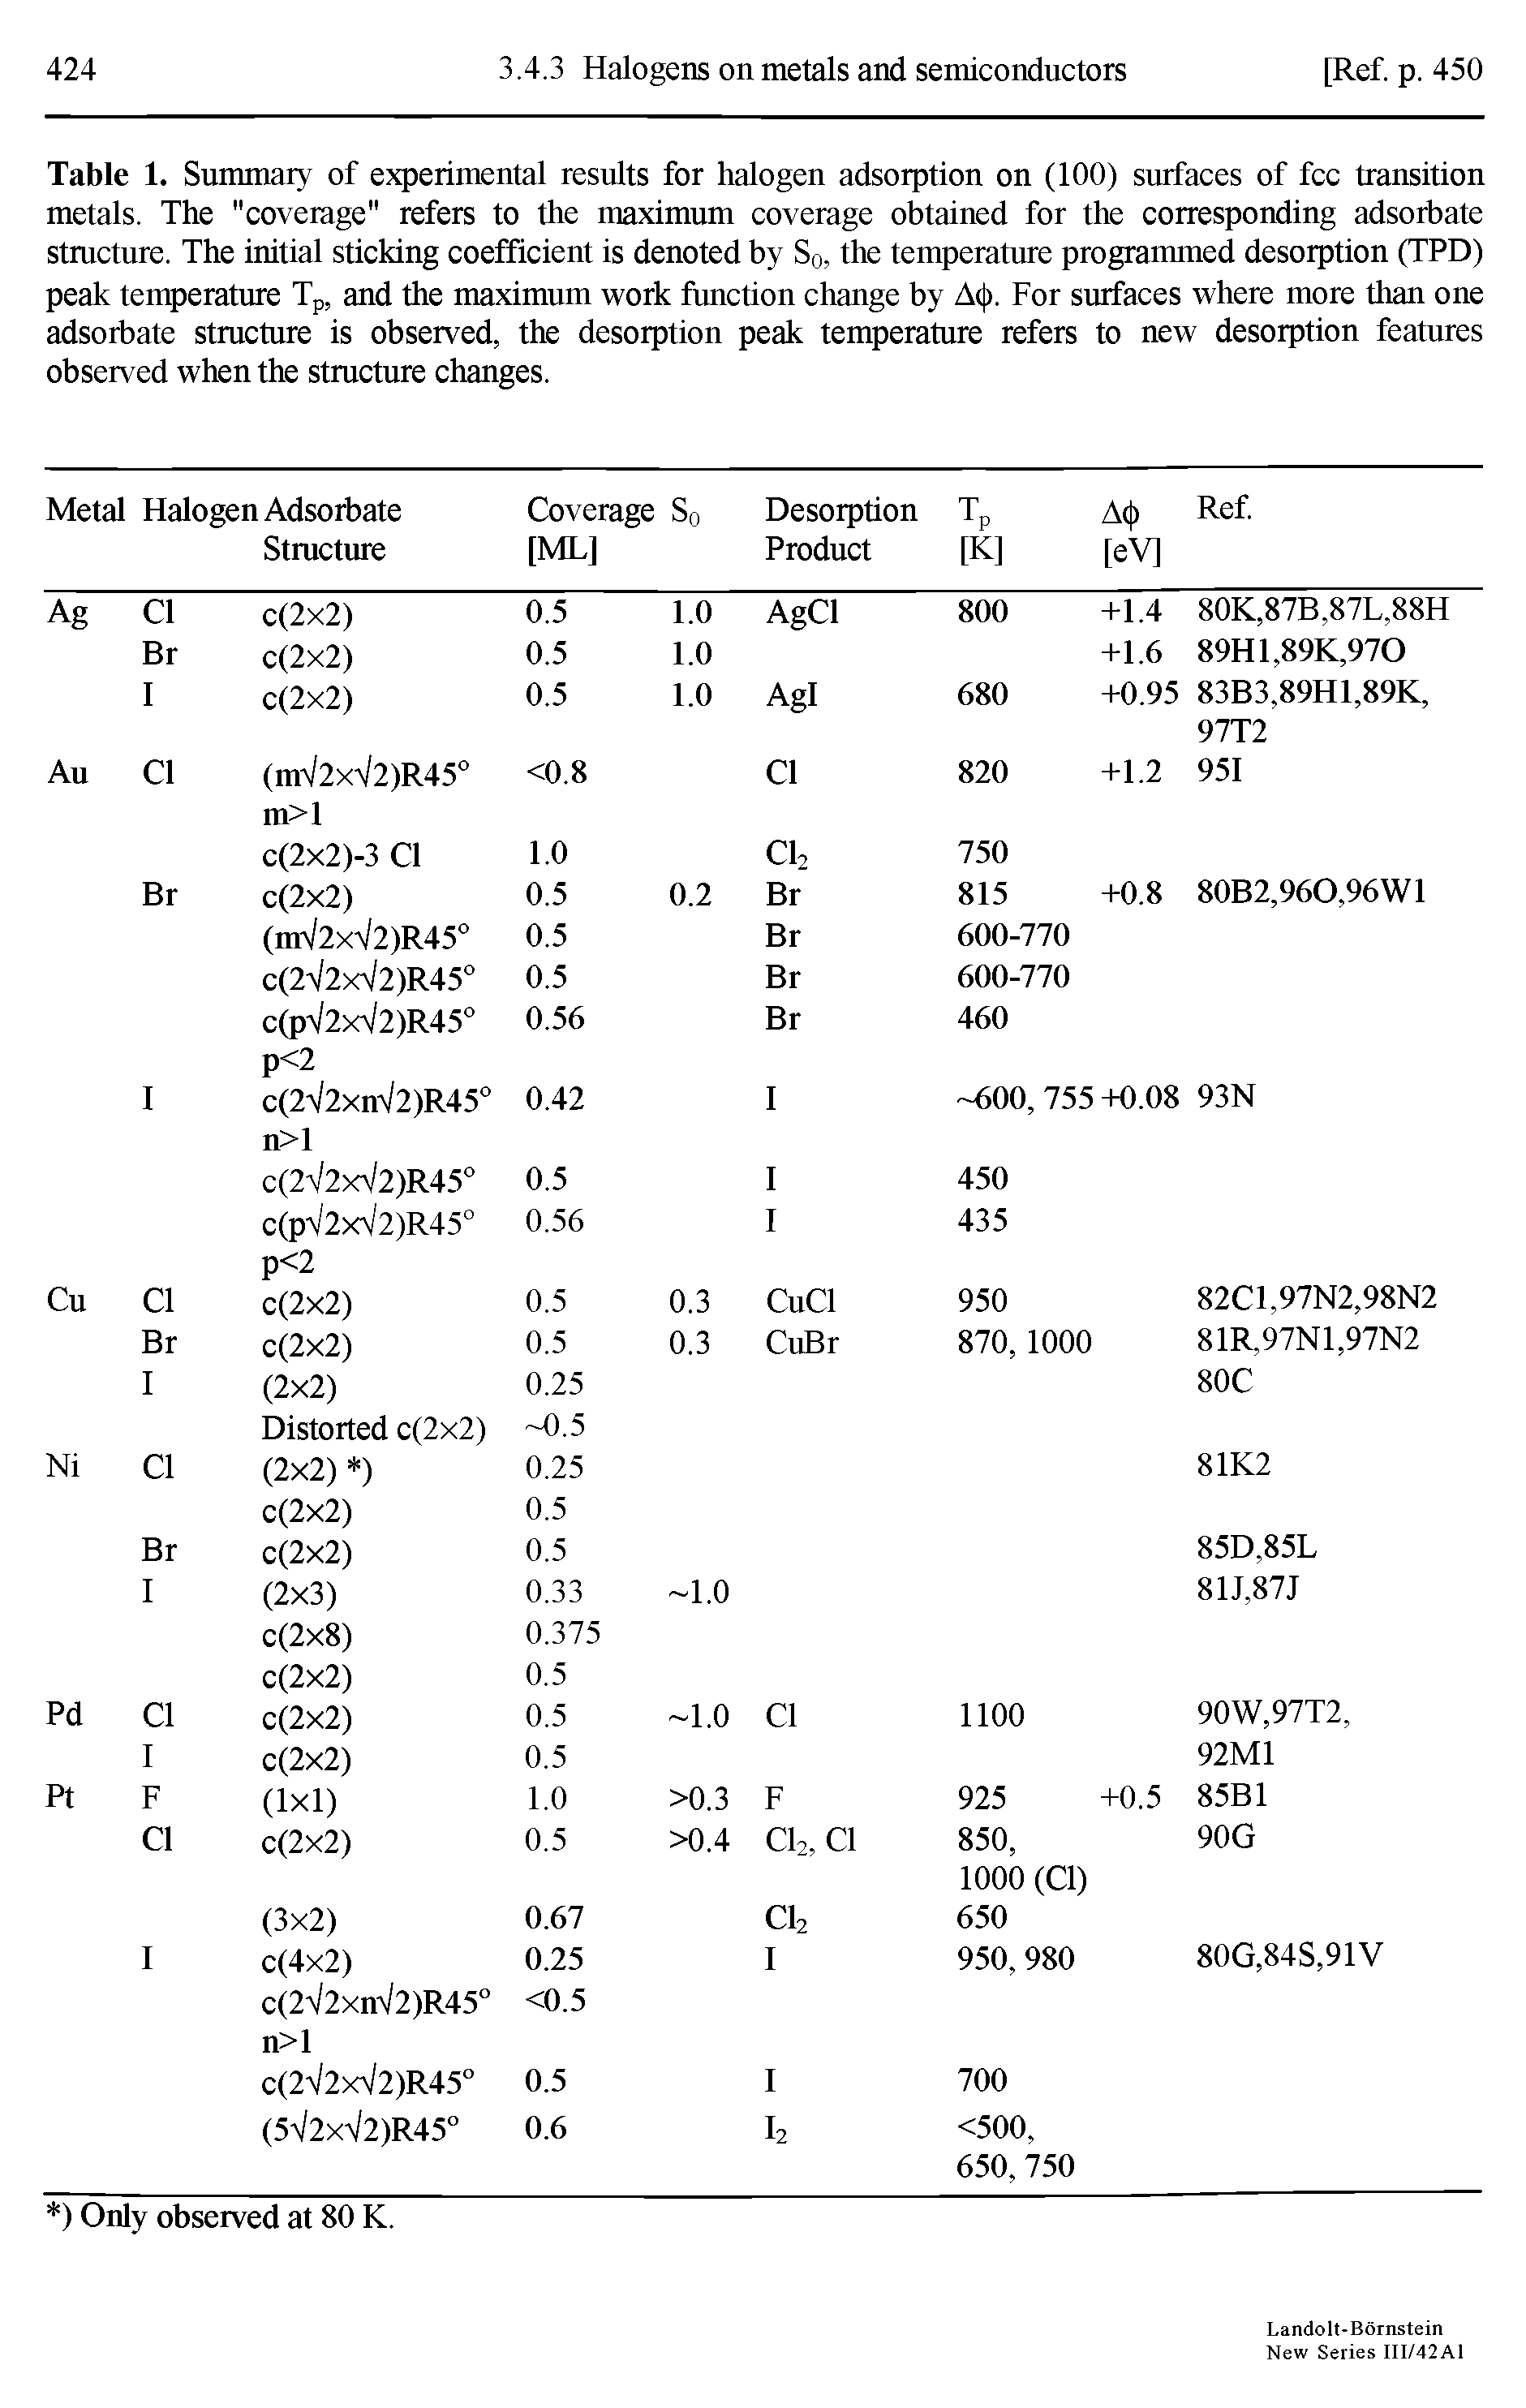 Table 1. Summary of experimental results for halogen adsorption on (100) surfaces of fee transition metals. The "coverage" refers to the maximum coverage obtained for the corresponding adsorbate stmcture. The initial sticking coefficient is denoted by So, the temperature programmed desorption (TPD) peak temperature Tp, and the maximum work function change by A( ). For surfaces where more than one adsorbate structure is observed, the desorption peak temperature refers to new desorption features observed when the stmcture changes. ...